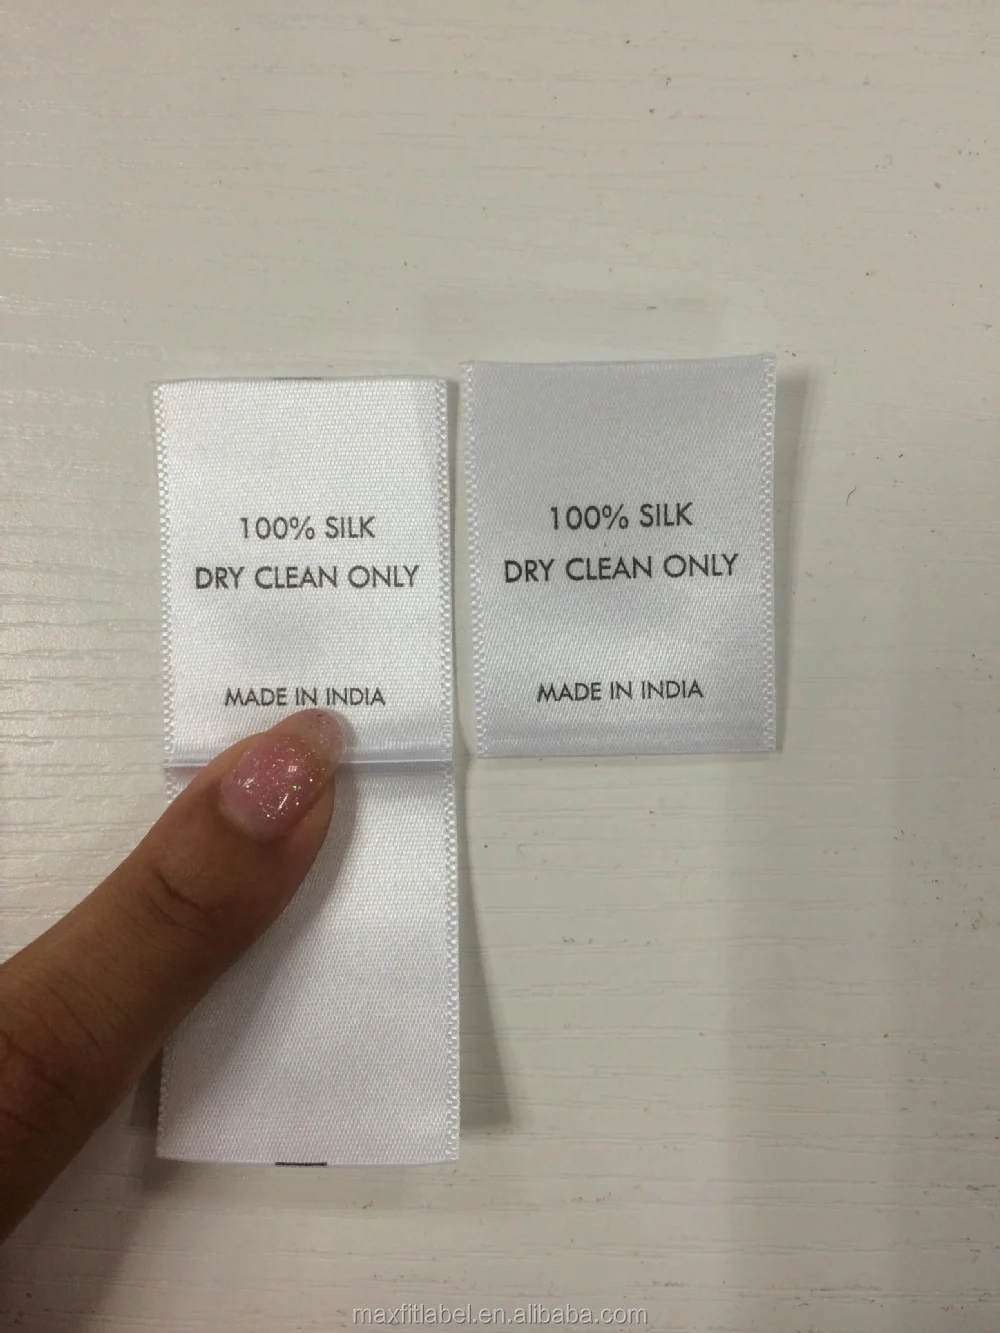 Garment Care Label/washable Tags Labels/polyester Woven Cloth Labels ...